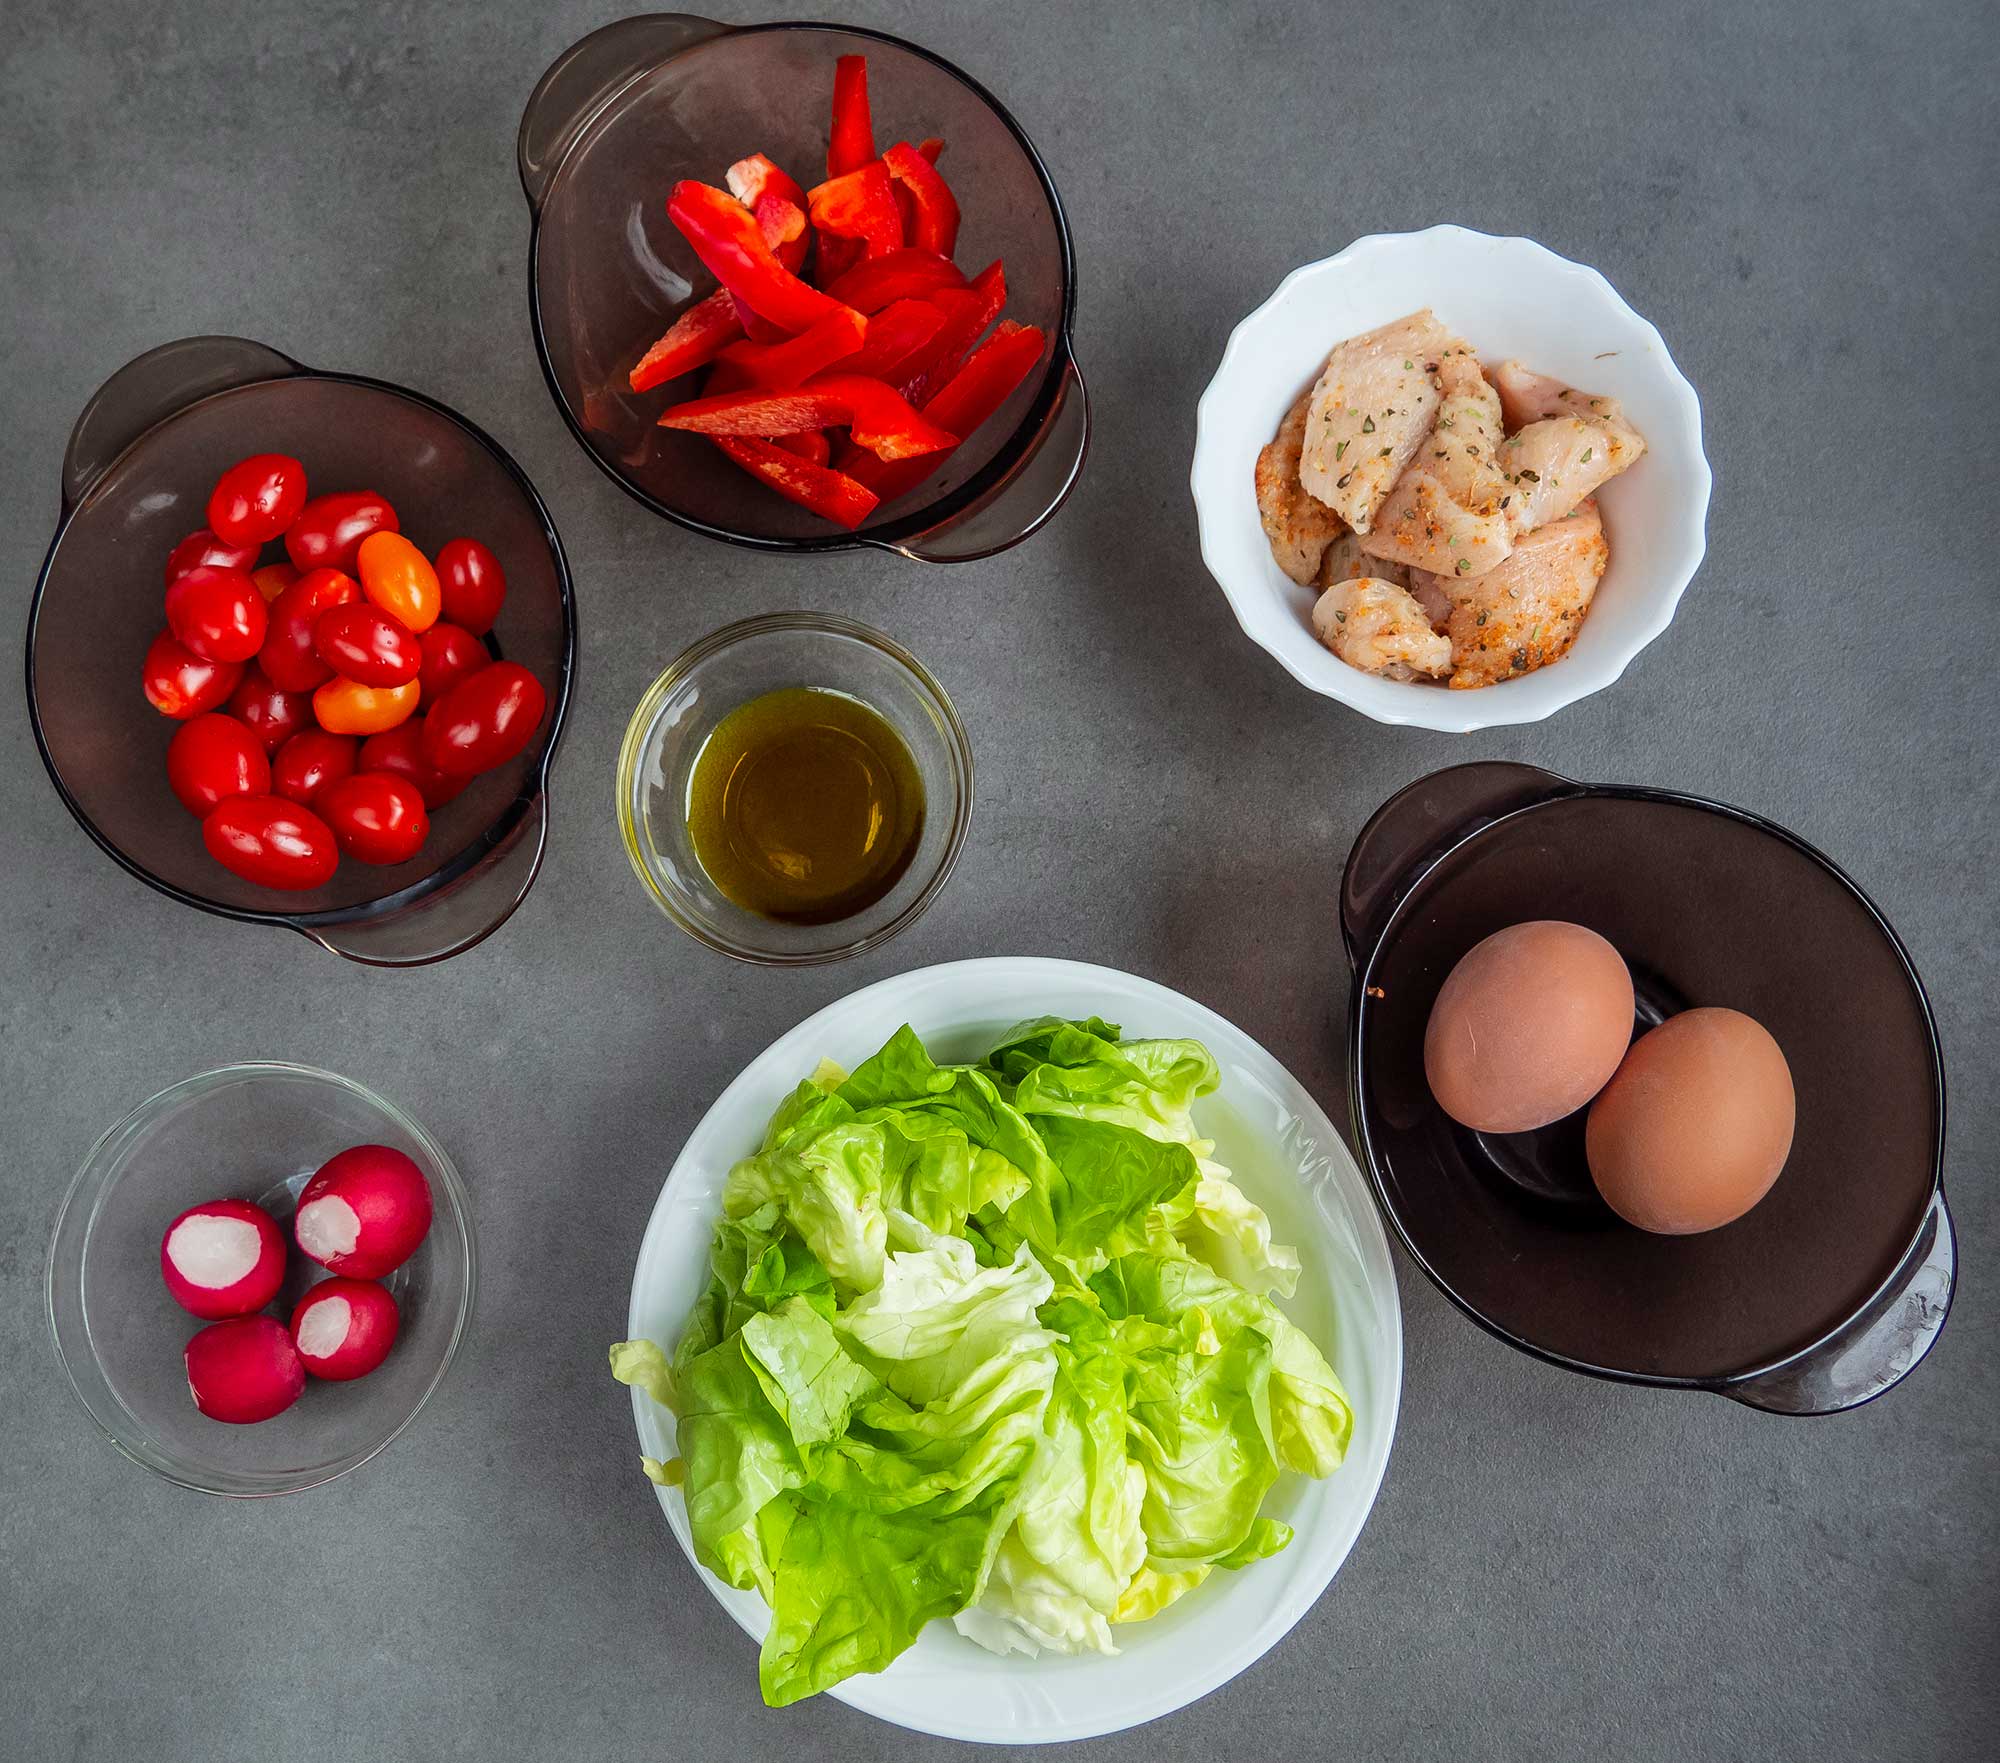 Salad with Grilled Chicken and Eggs ingredients